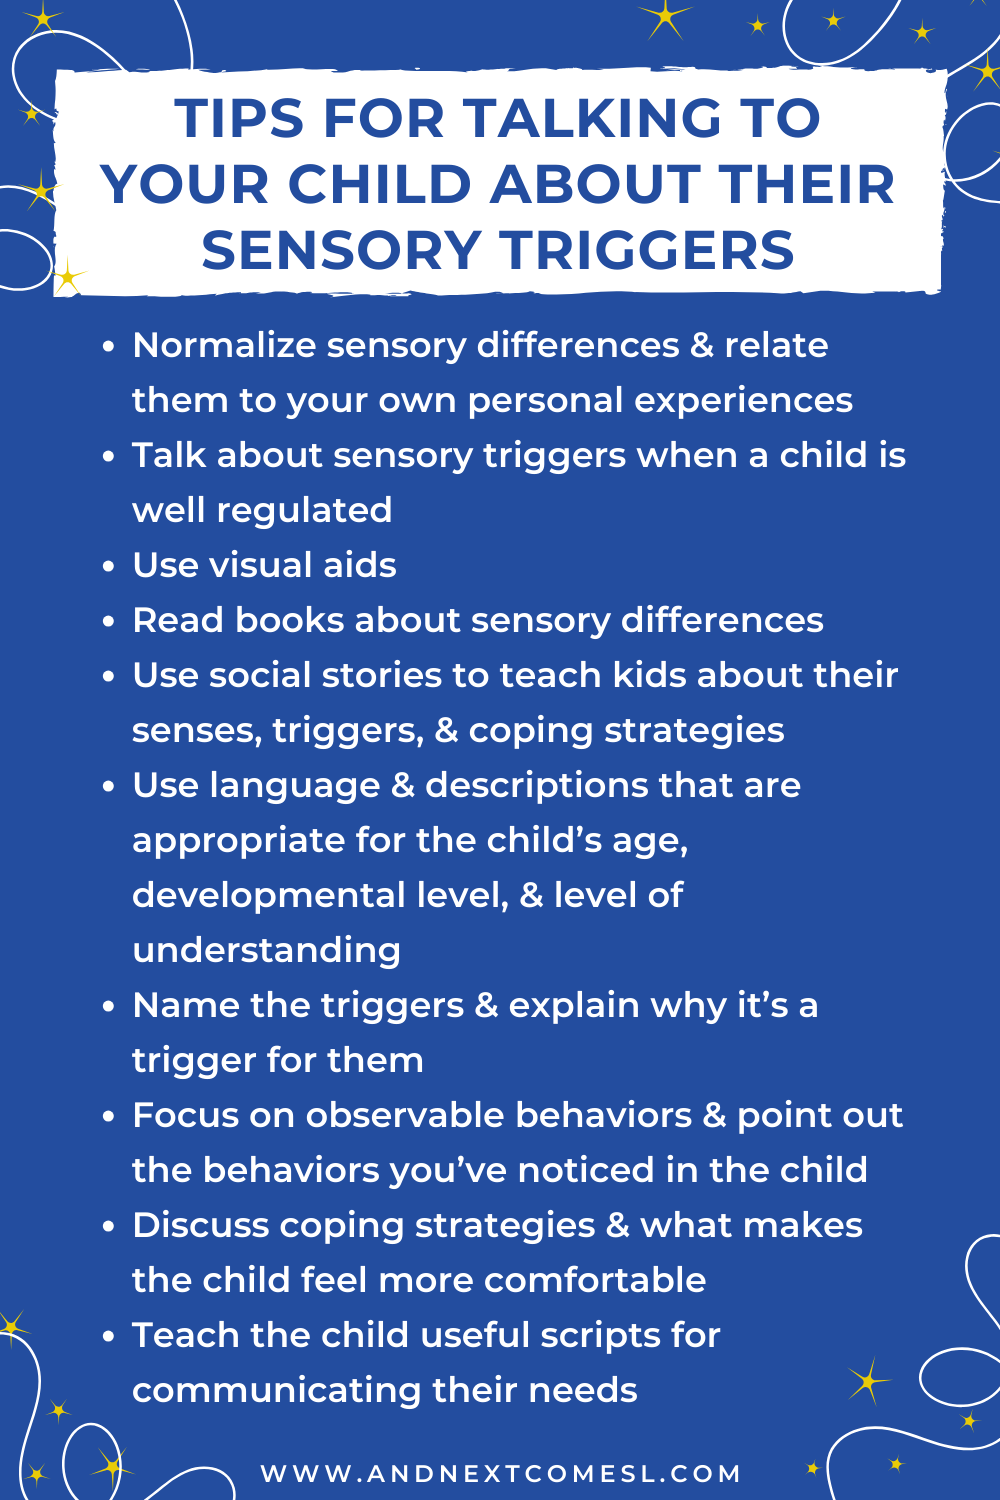 A list of tips for how to talk your child about their sensory triggers